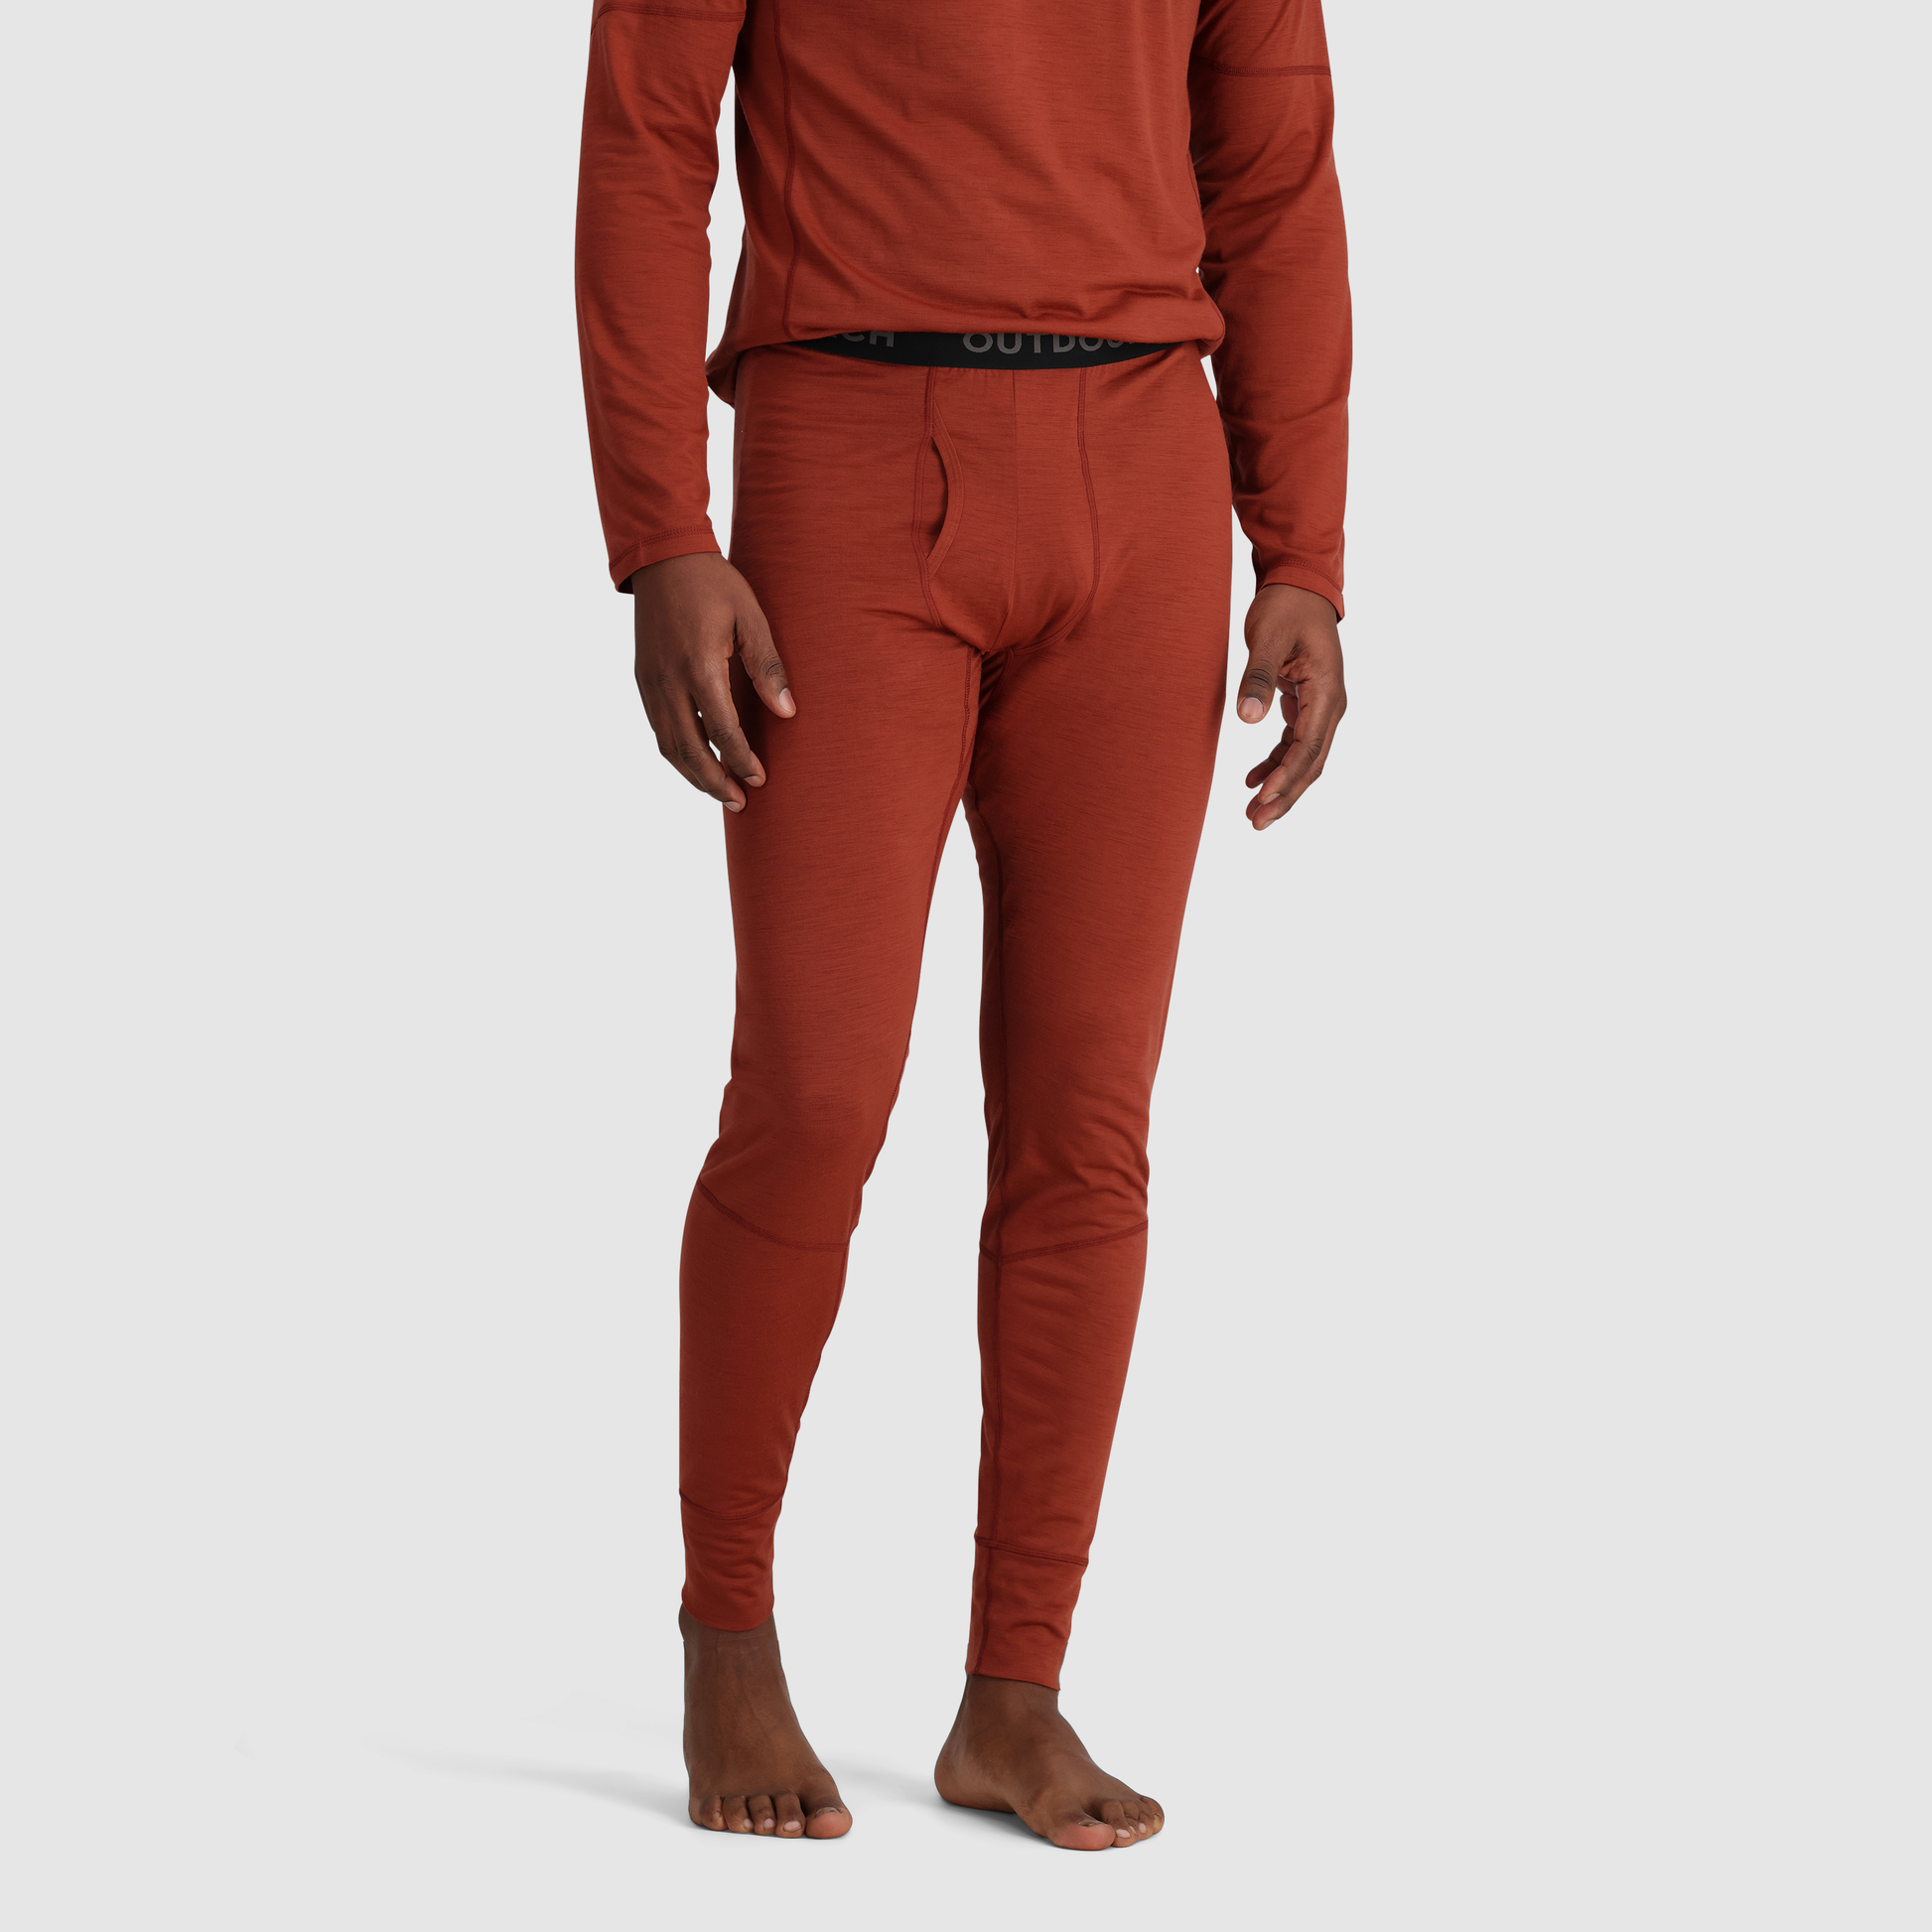 Thermal underwear ROSSIGNOL Compression Hero - 2021/22, Ski Clothing \  Thermal Wear \ Mens Outlet \ Clothing \ View All